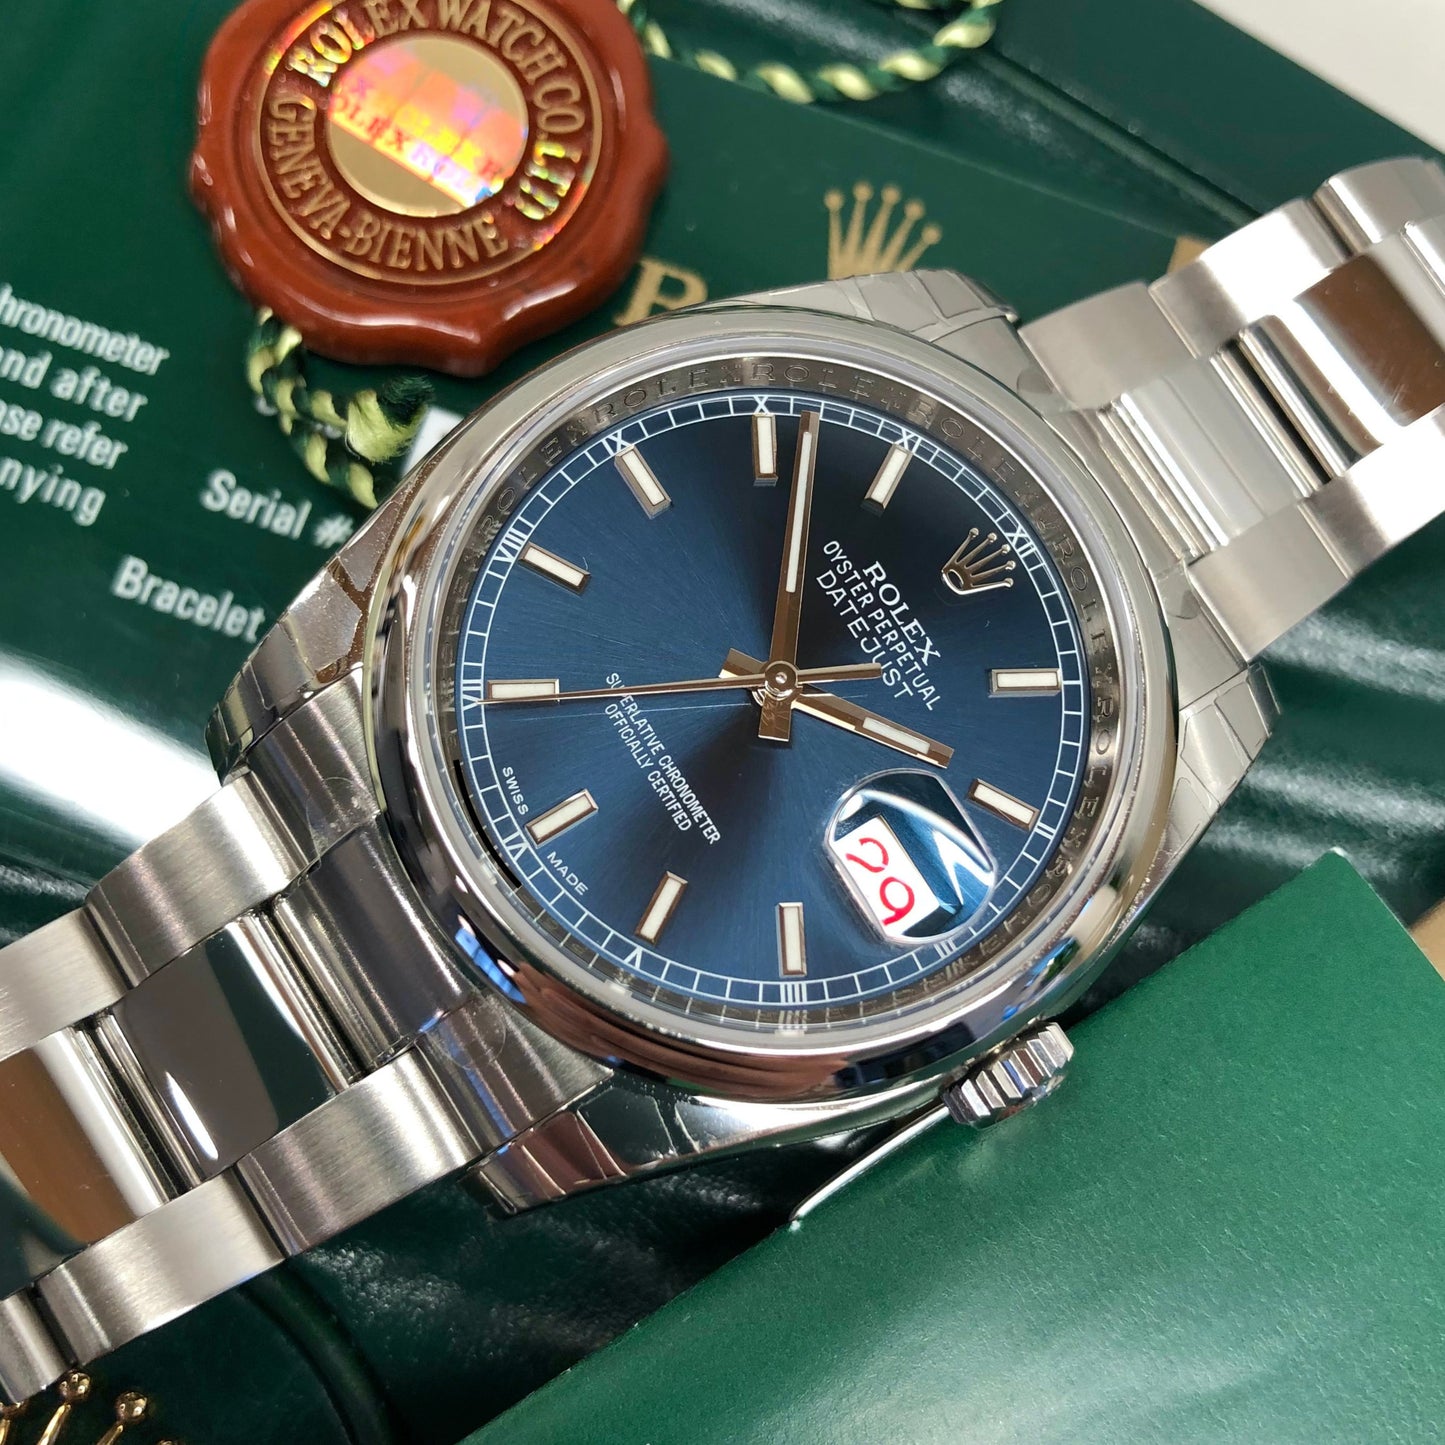 2014 Rolex Datejust 116200 Blue Oyster 36mm Smooth Bezel Wristwatch with Box and Papers Unworn Factory Wrapped - Hashtag Watch Company